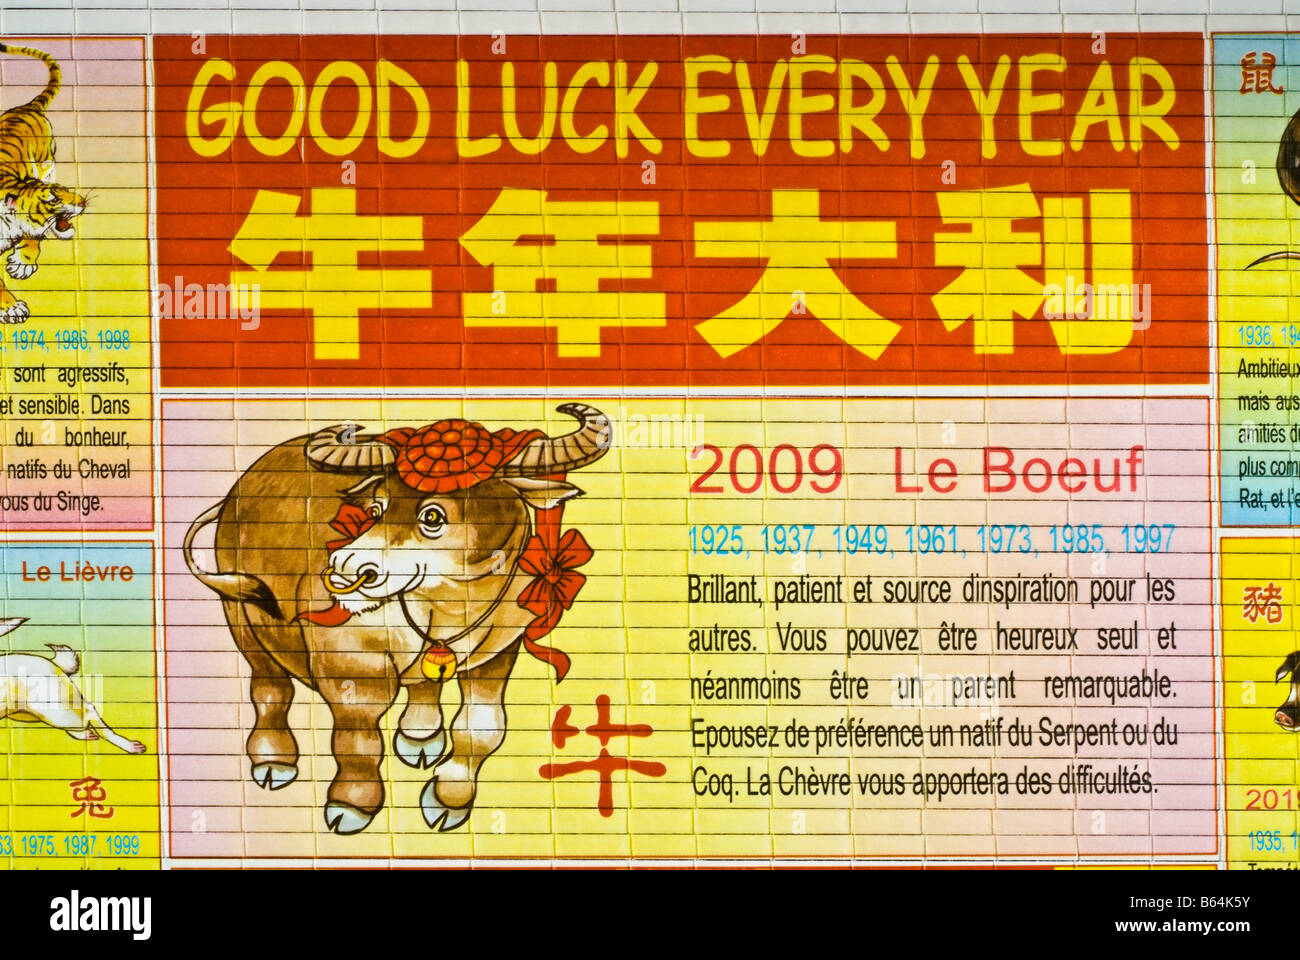 Chinese Contemporary Art  'Chinese Astrological Calendar' 'chinese new year' with illustrations 'Year of the Cow' Zodiac Stock Photo